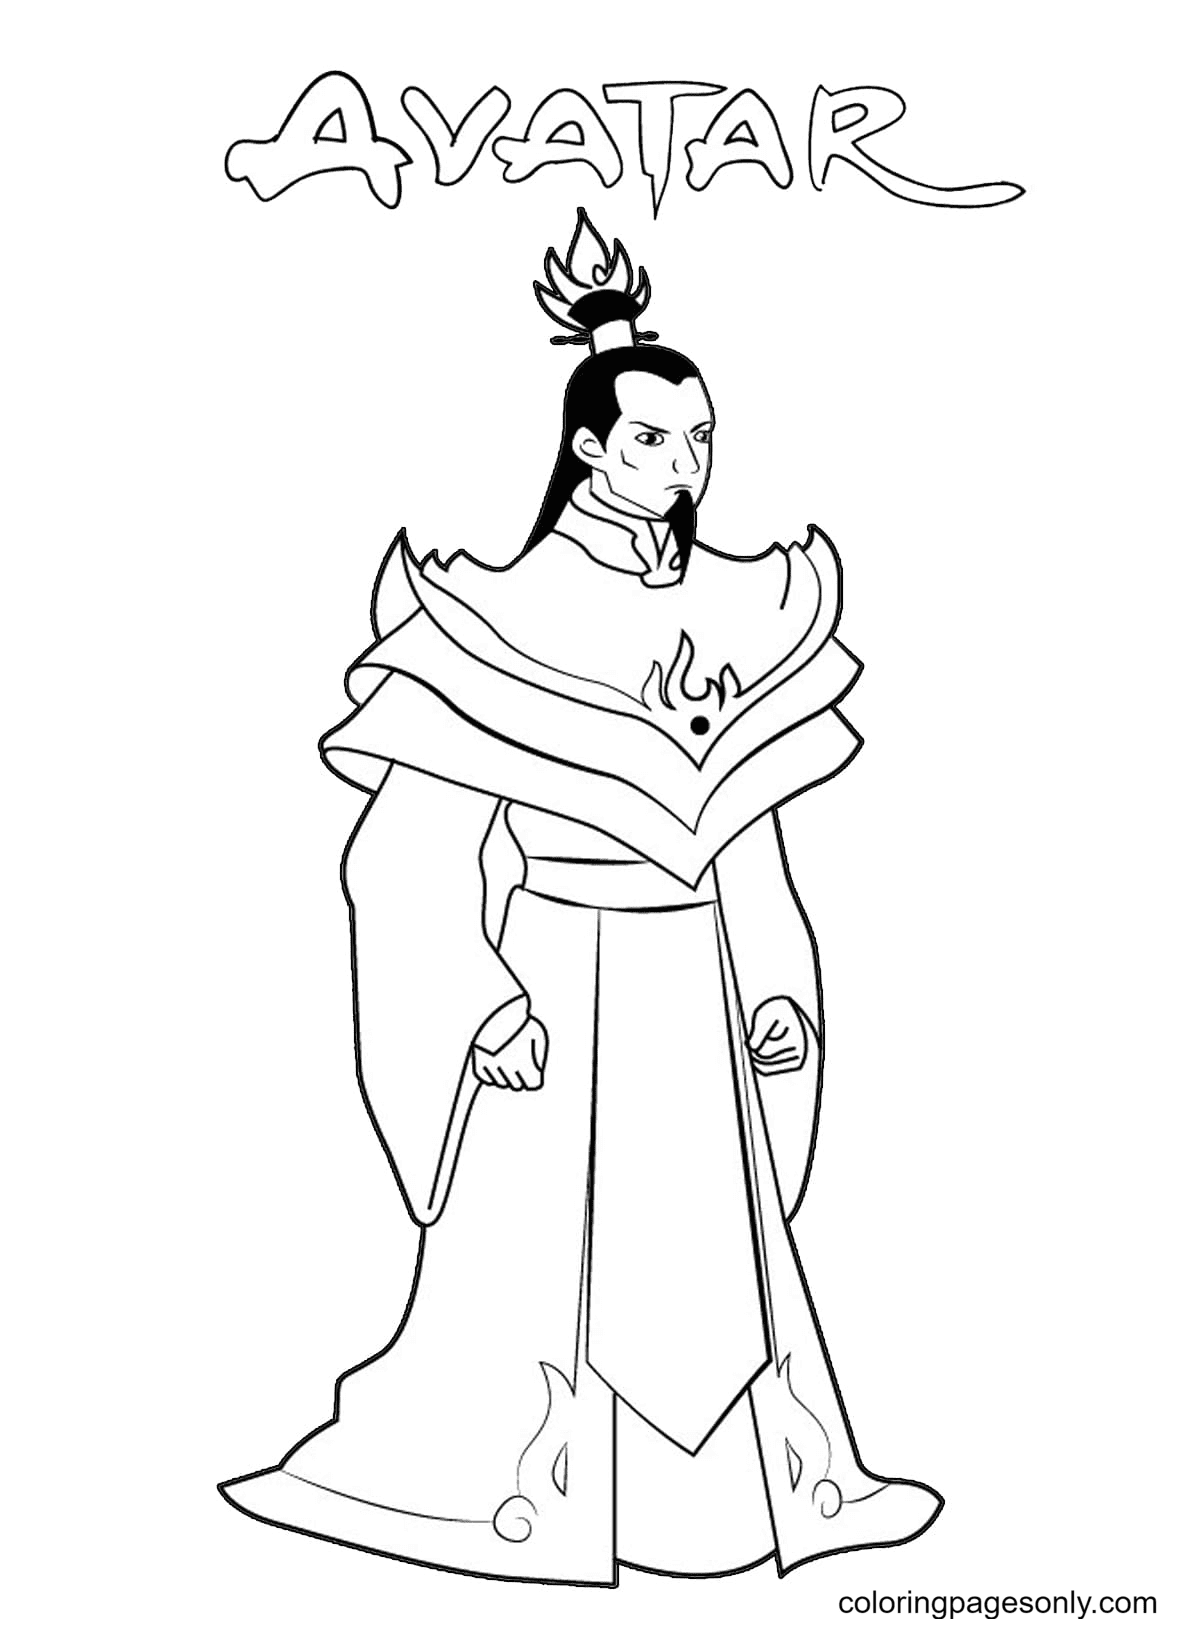 Fire Lord Ozai from Avatar